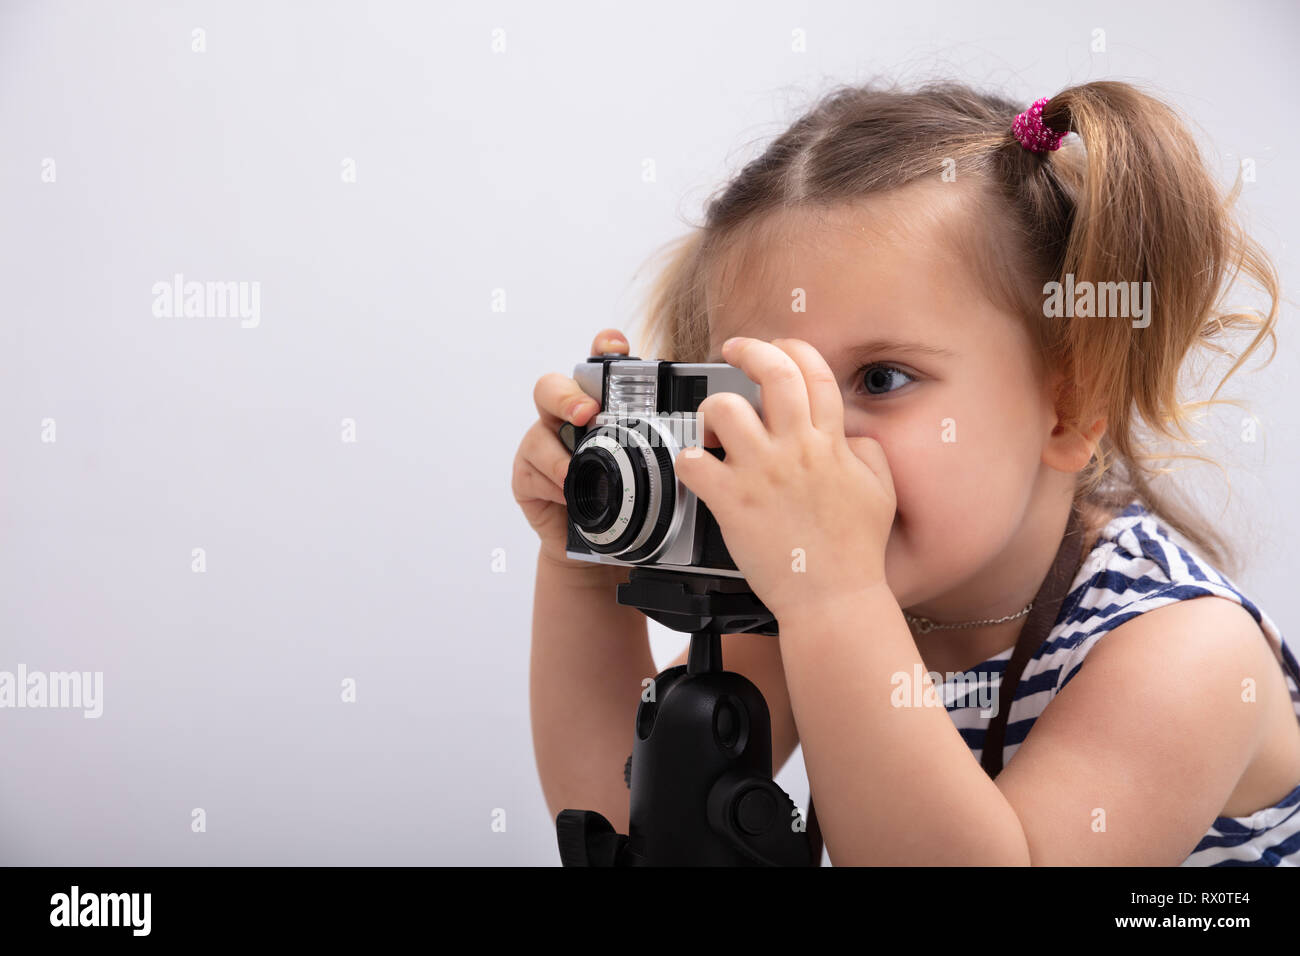 Little Girl Standing Against White Background While Taking Picture Using Photo Camera Stock Photo